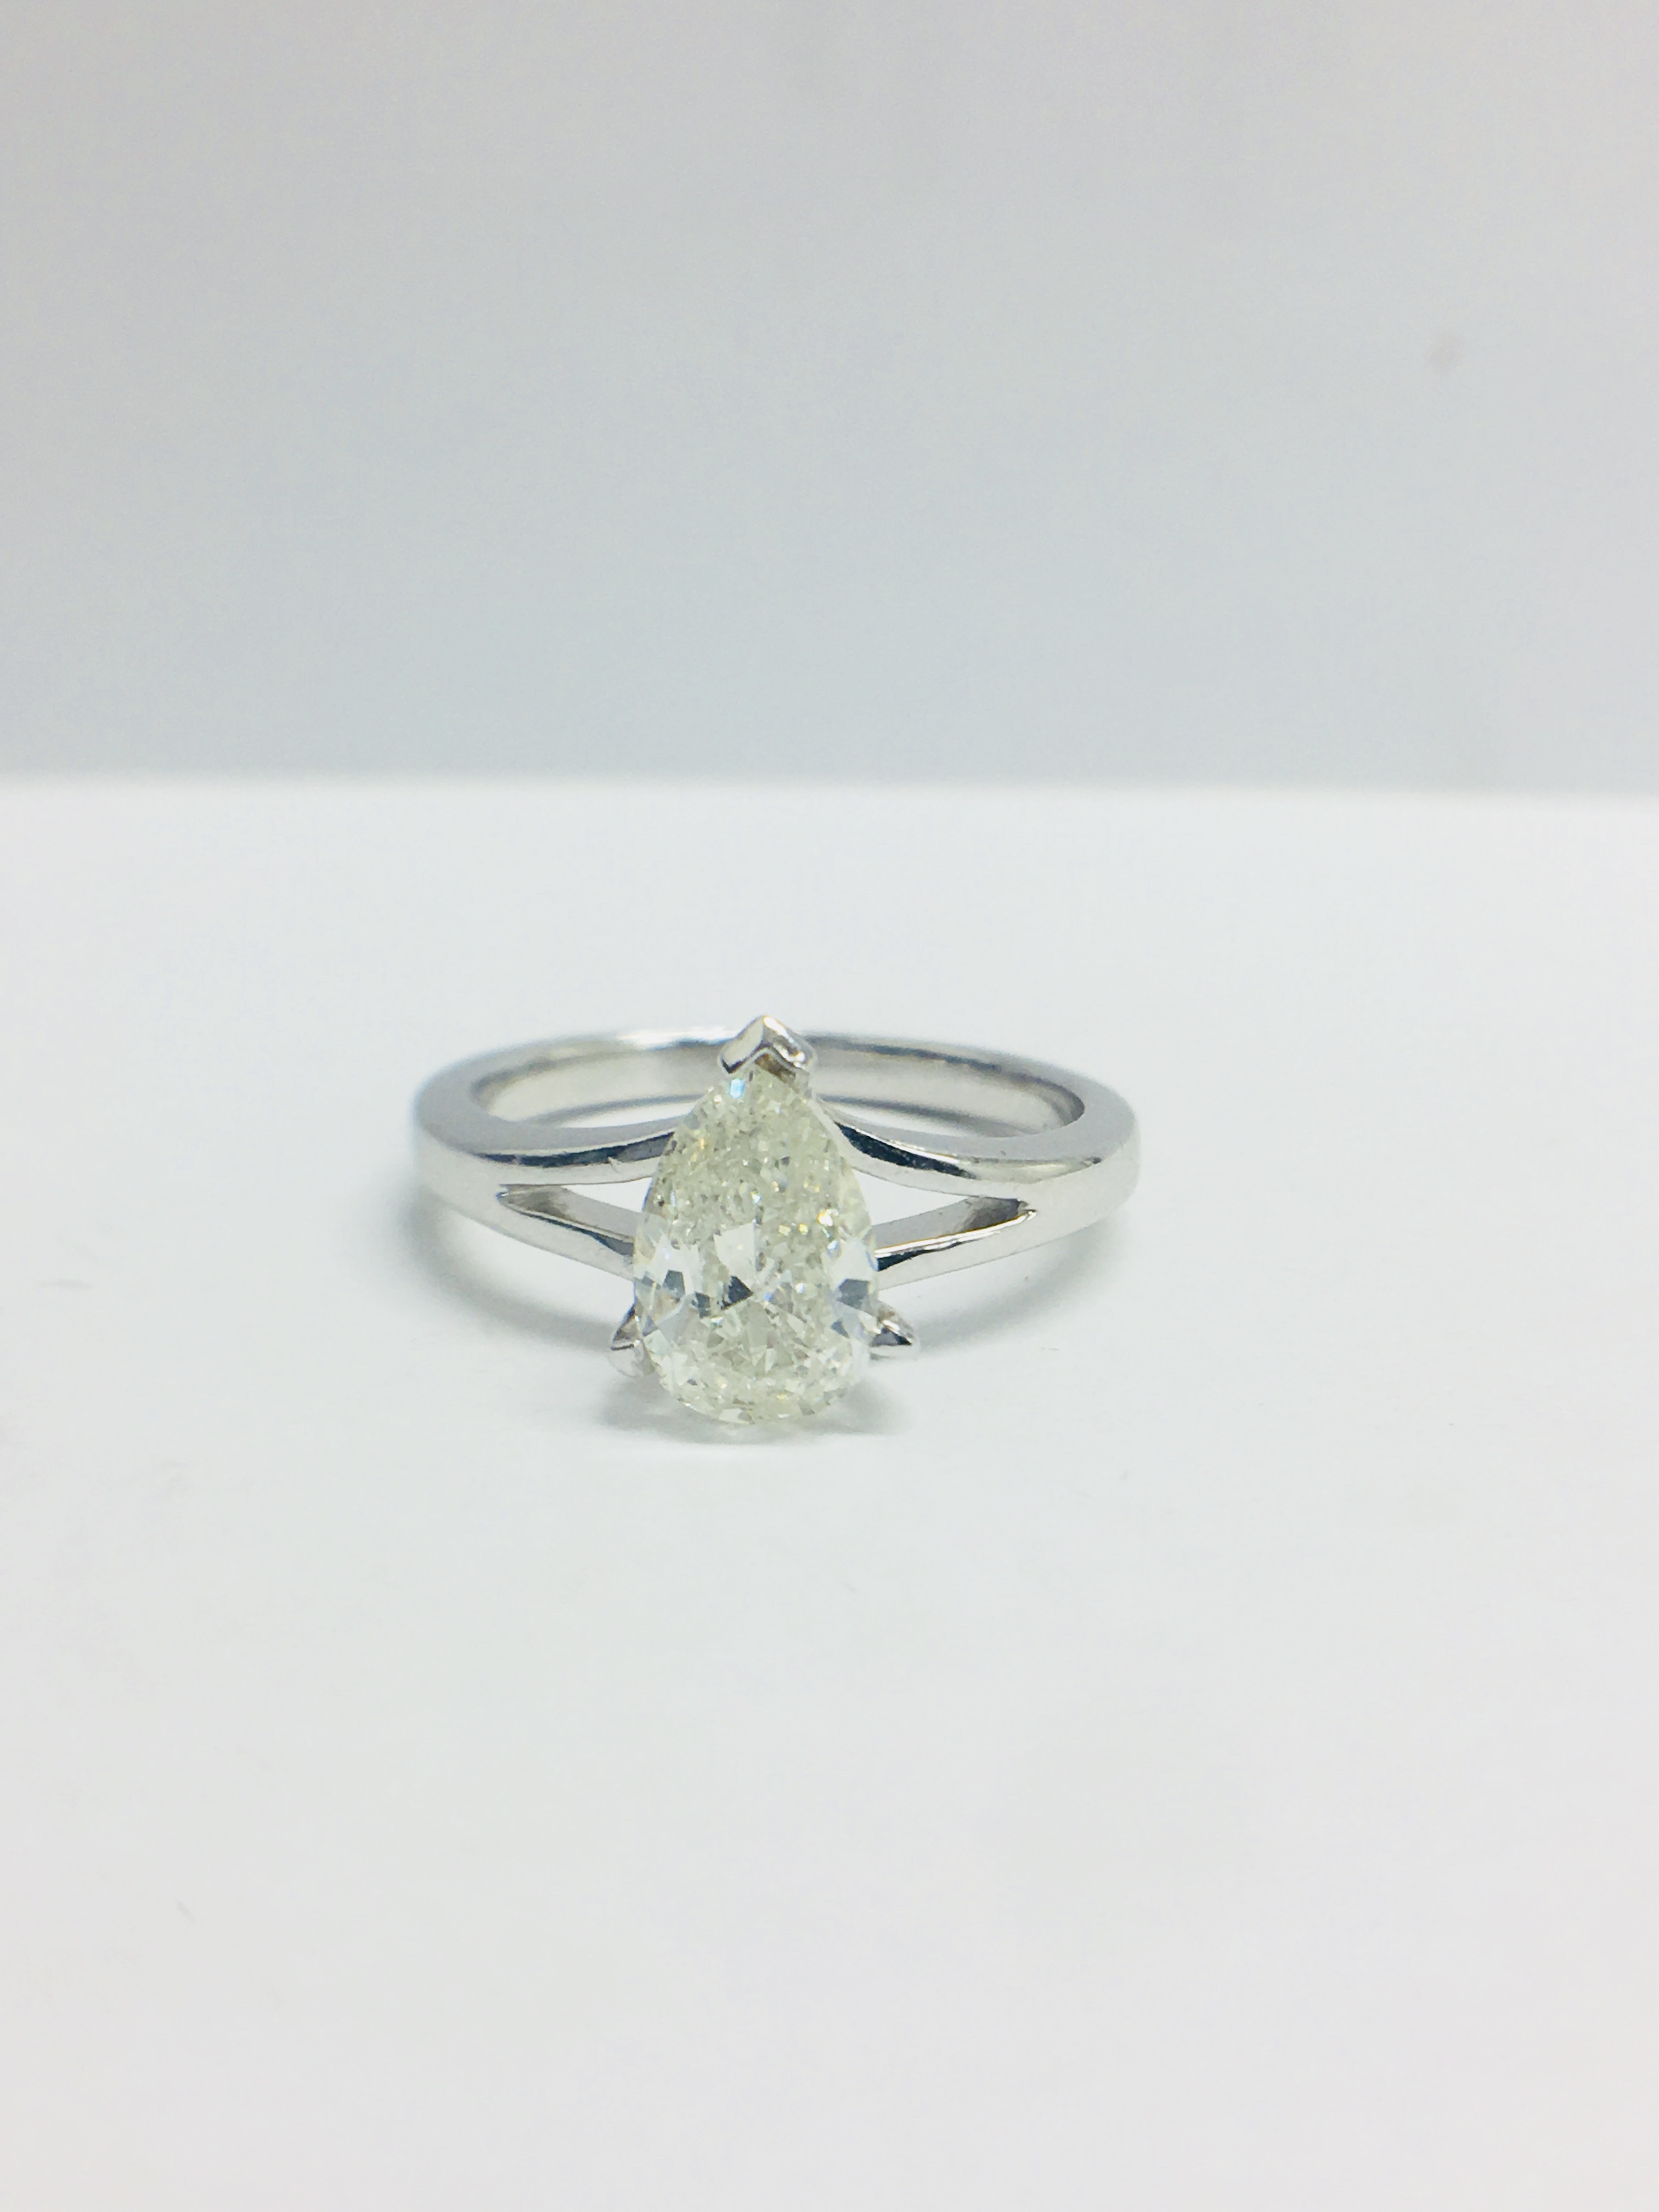 1.15Ct Pearshape Diamond Solitaire Ring, - Image 6 of 6